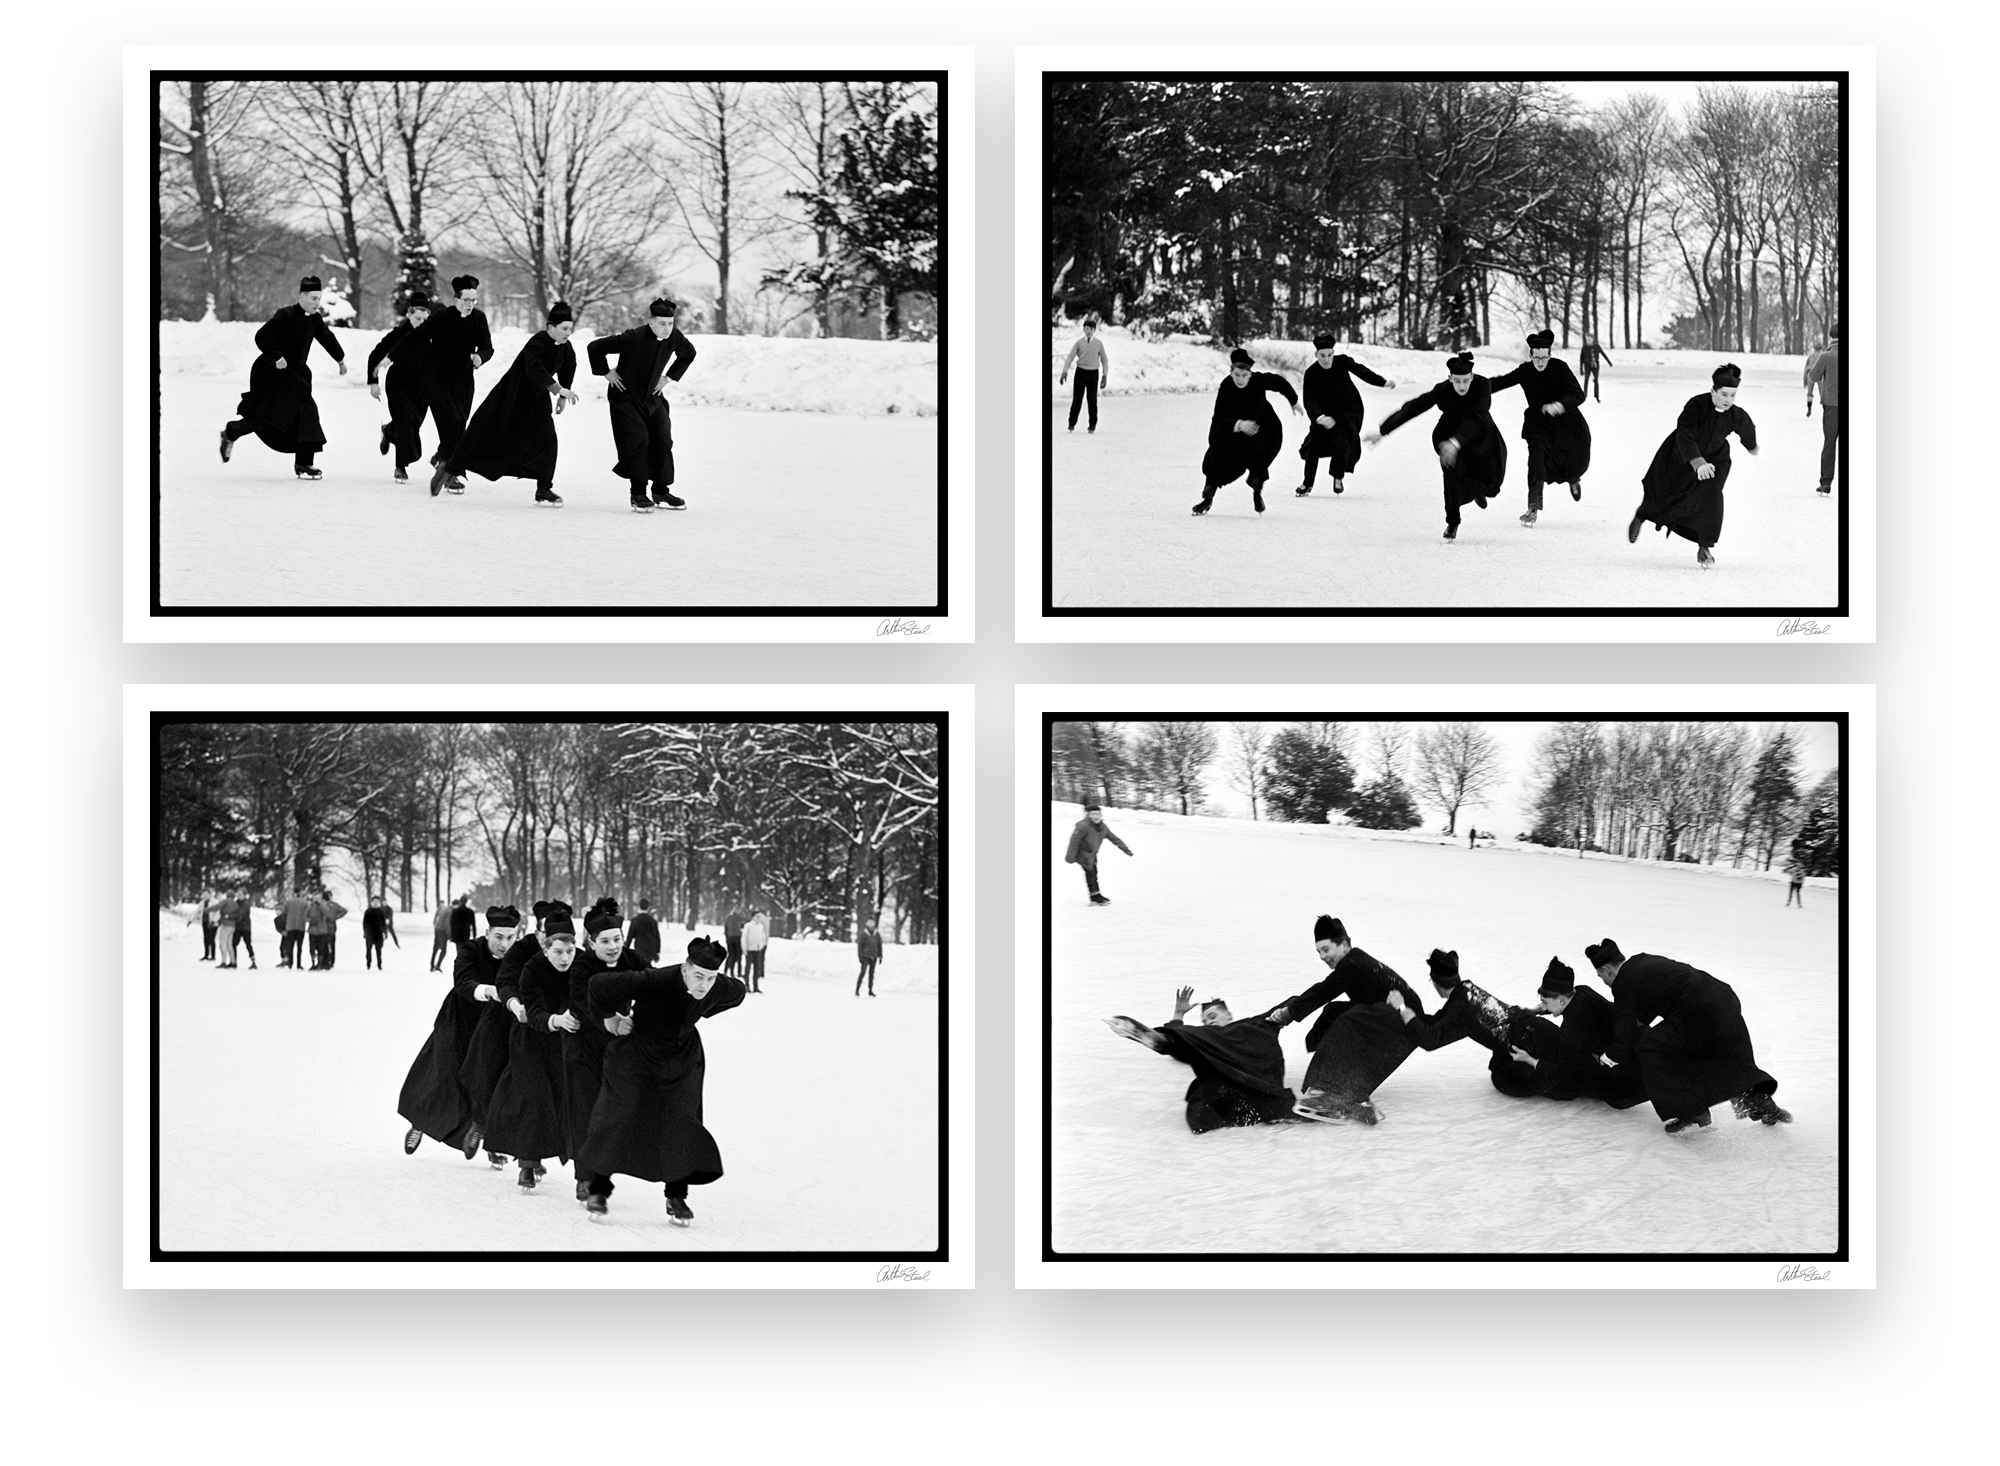 ice-skating-priests-rare-photograph-by-arthur-steel